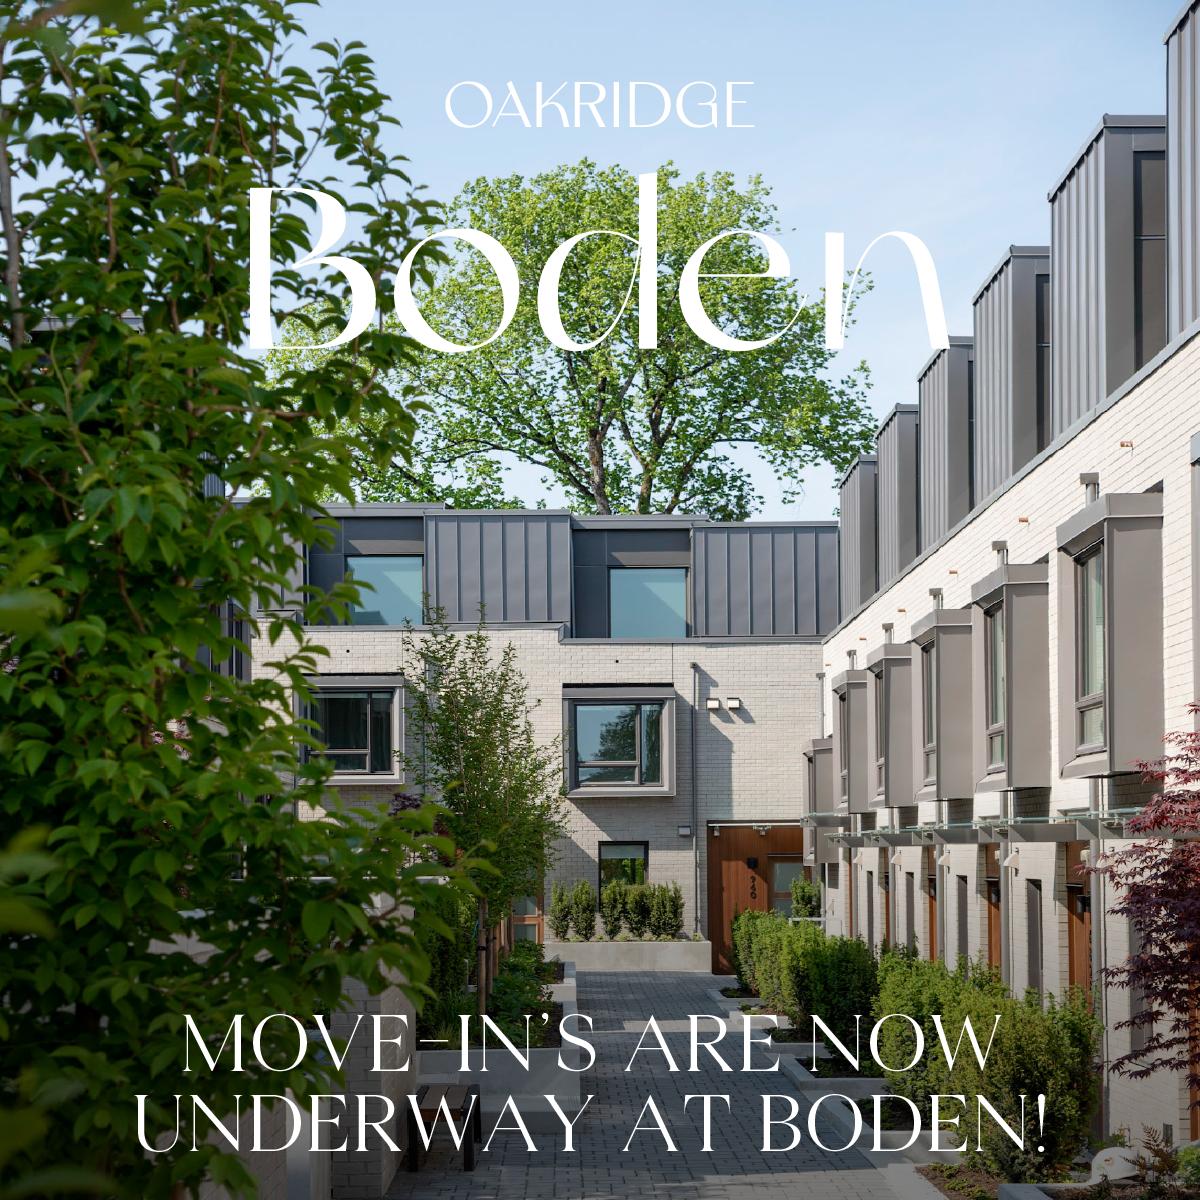 Oakridge Boden Move-in ad showing townhomes and courtyard with landscaping